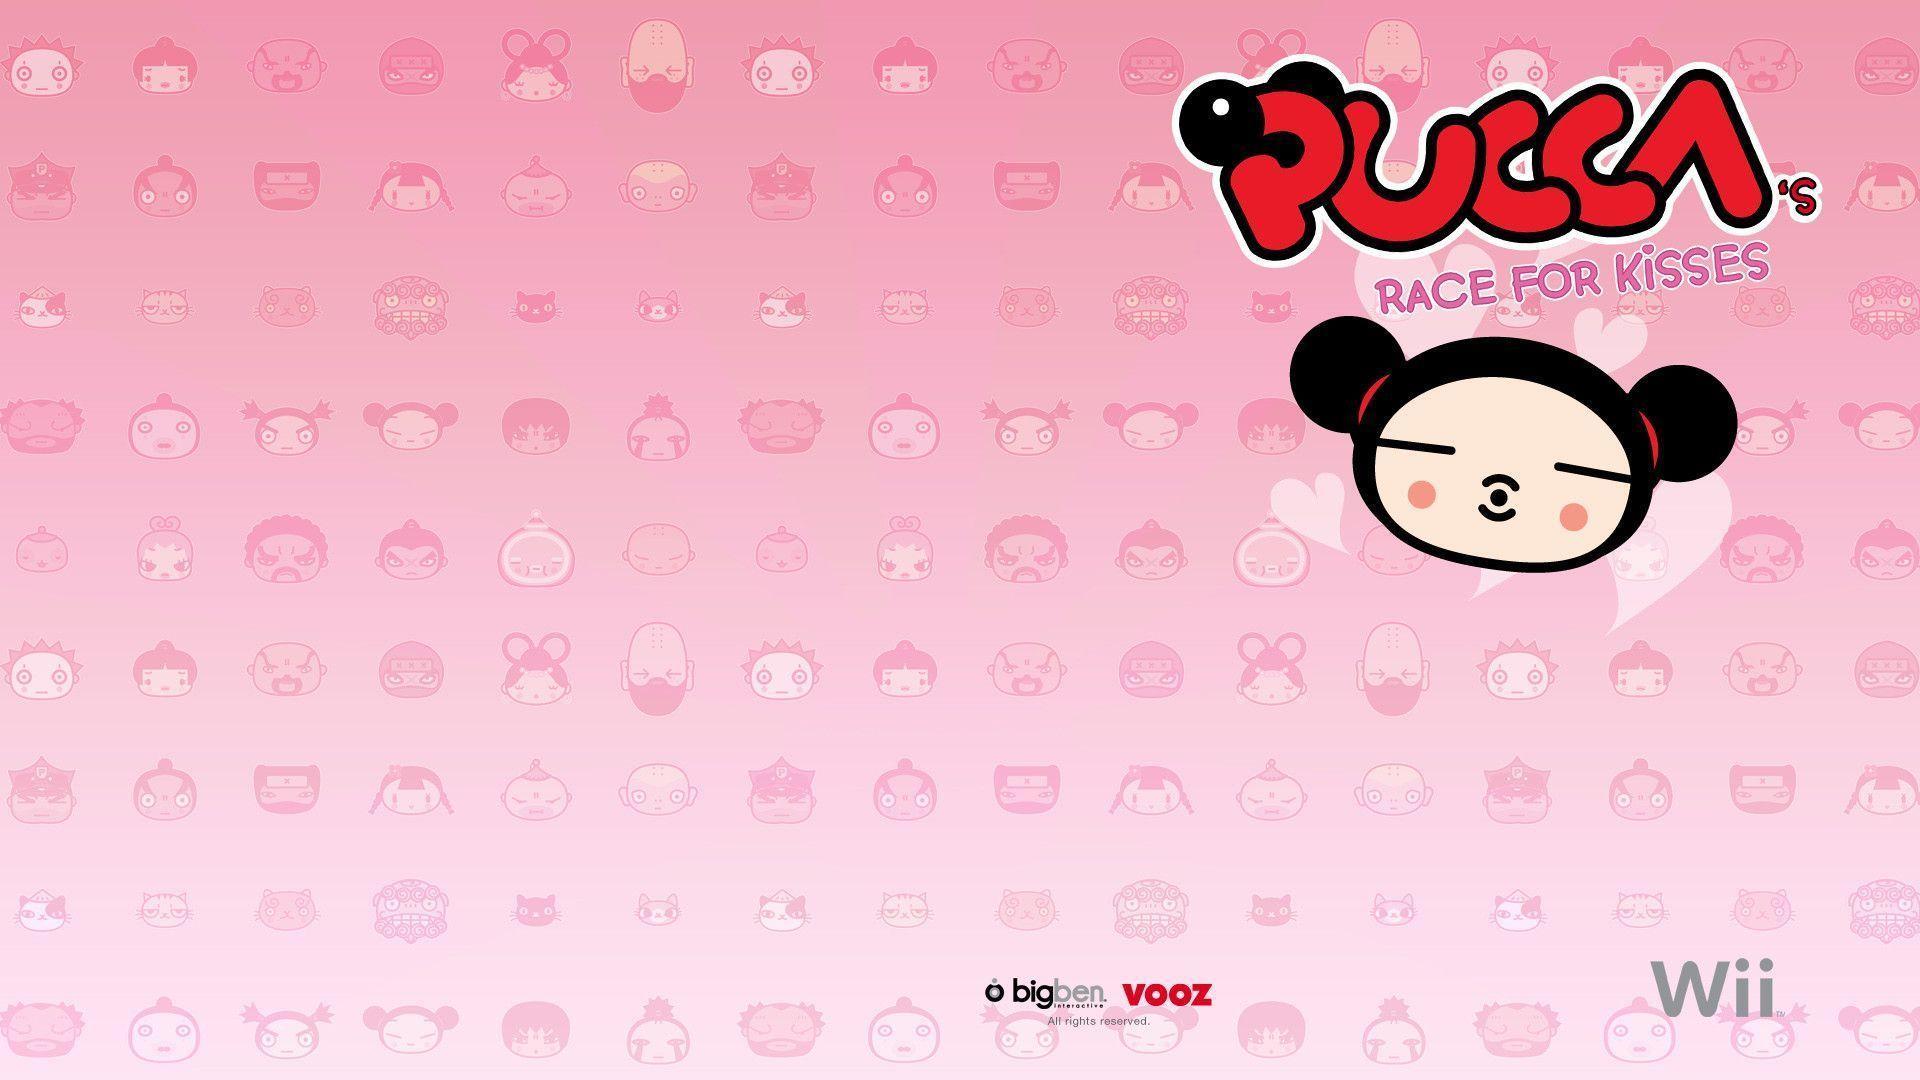 Pucca Background